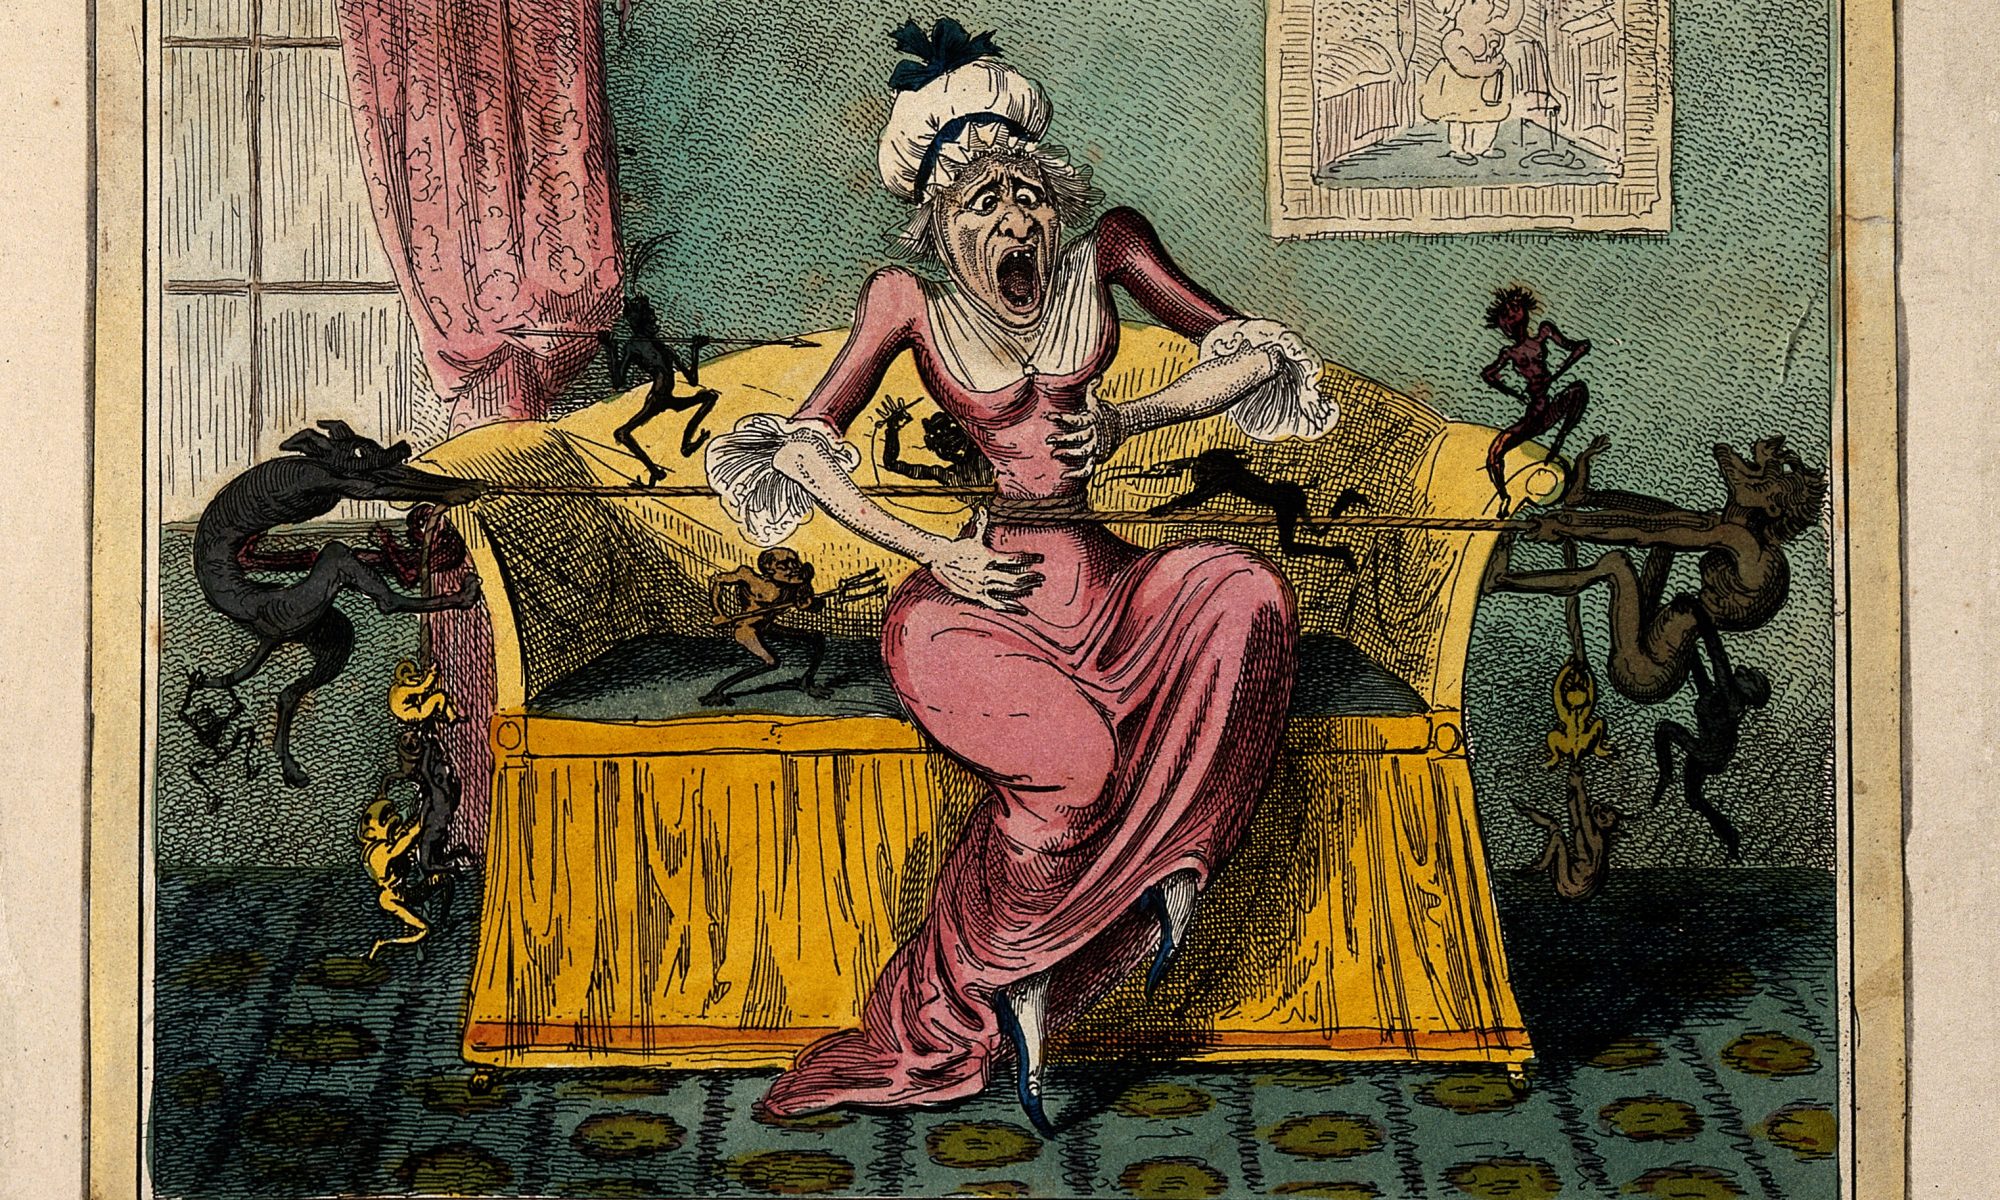 This coloured etching by G. Cruikshank from 1819 depicts a woman suffering the pain of cholic, illustrated by demons tugging on a rope wound around her stomach. (The image is from the Wellcome Collection.)